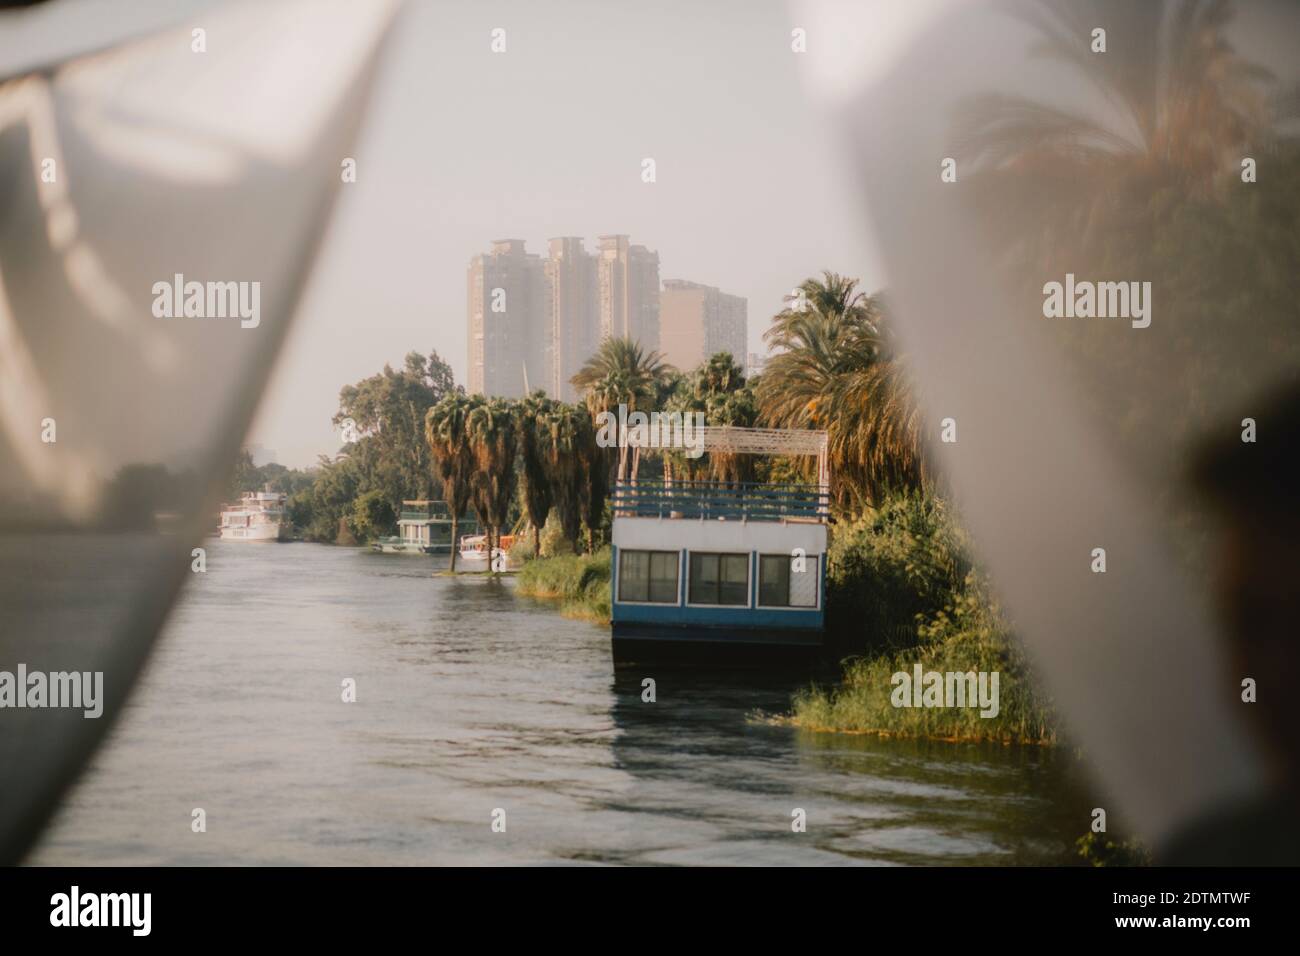 Views from the Nile River, Cairo, Egypt Stock Photo